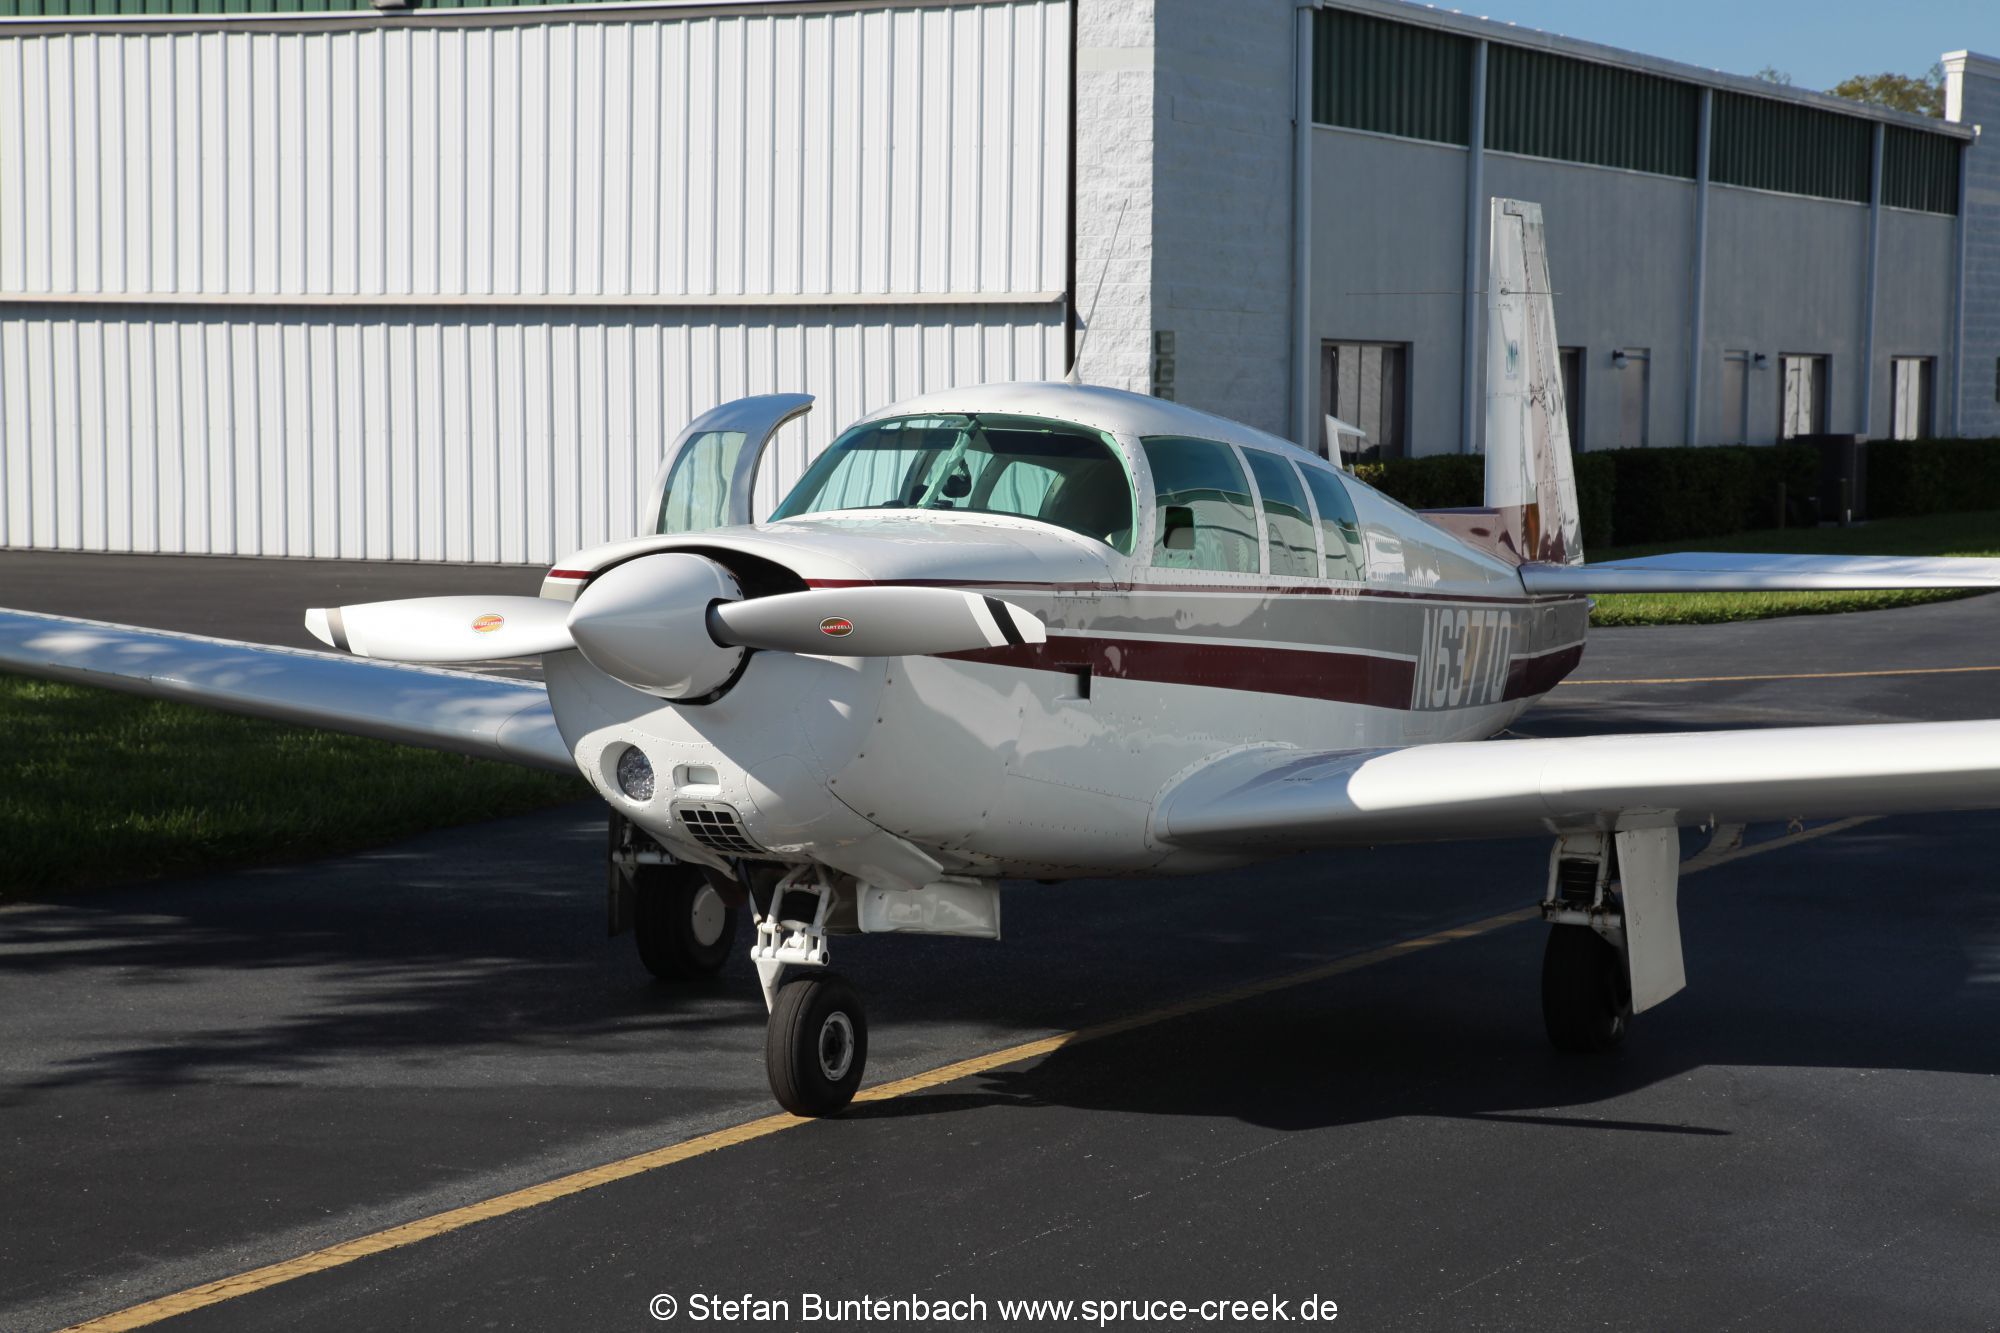 Mooney M20F N6377 at Spruce Creek Fly-In Community in Florida